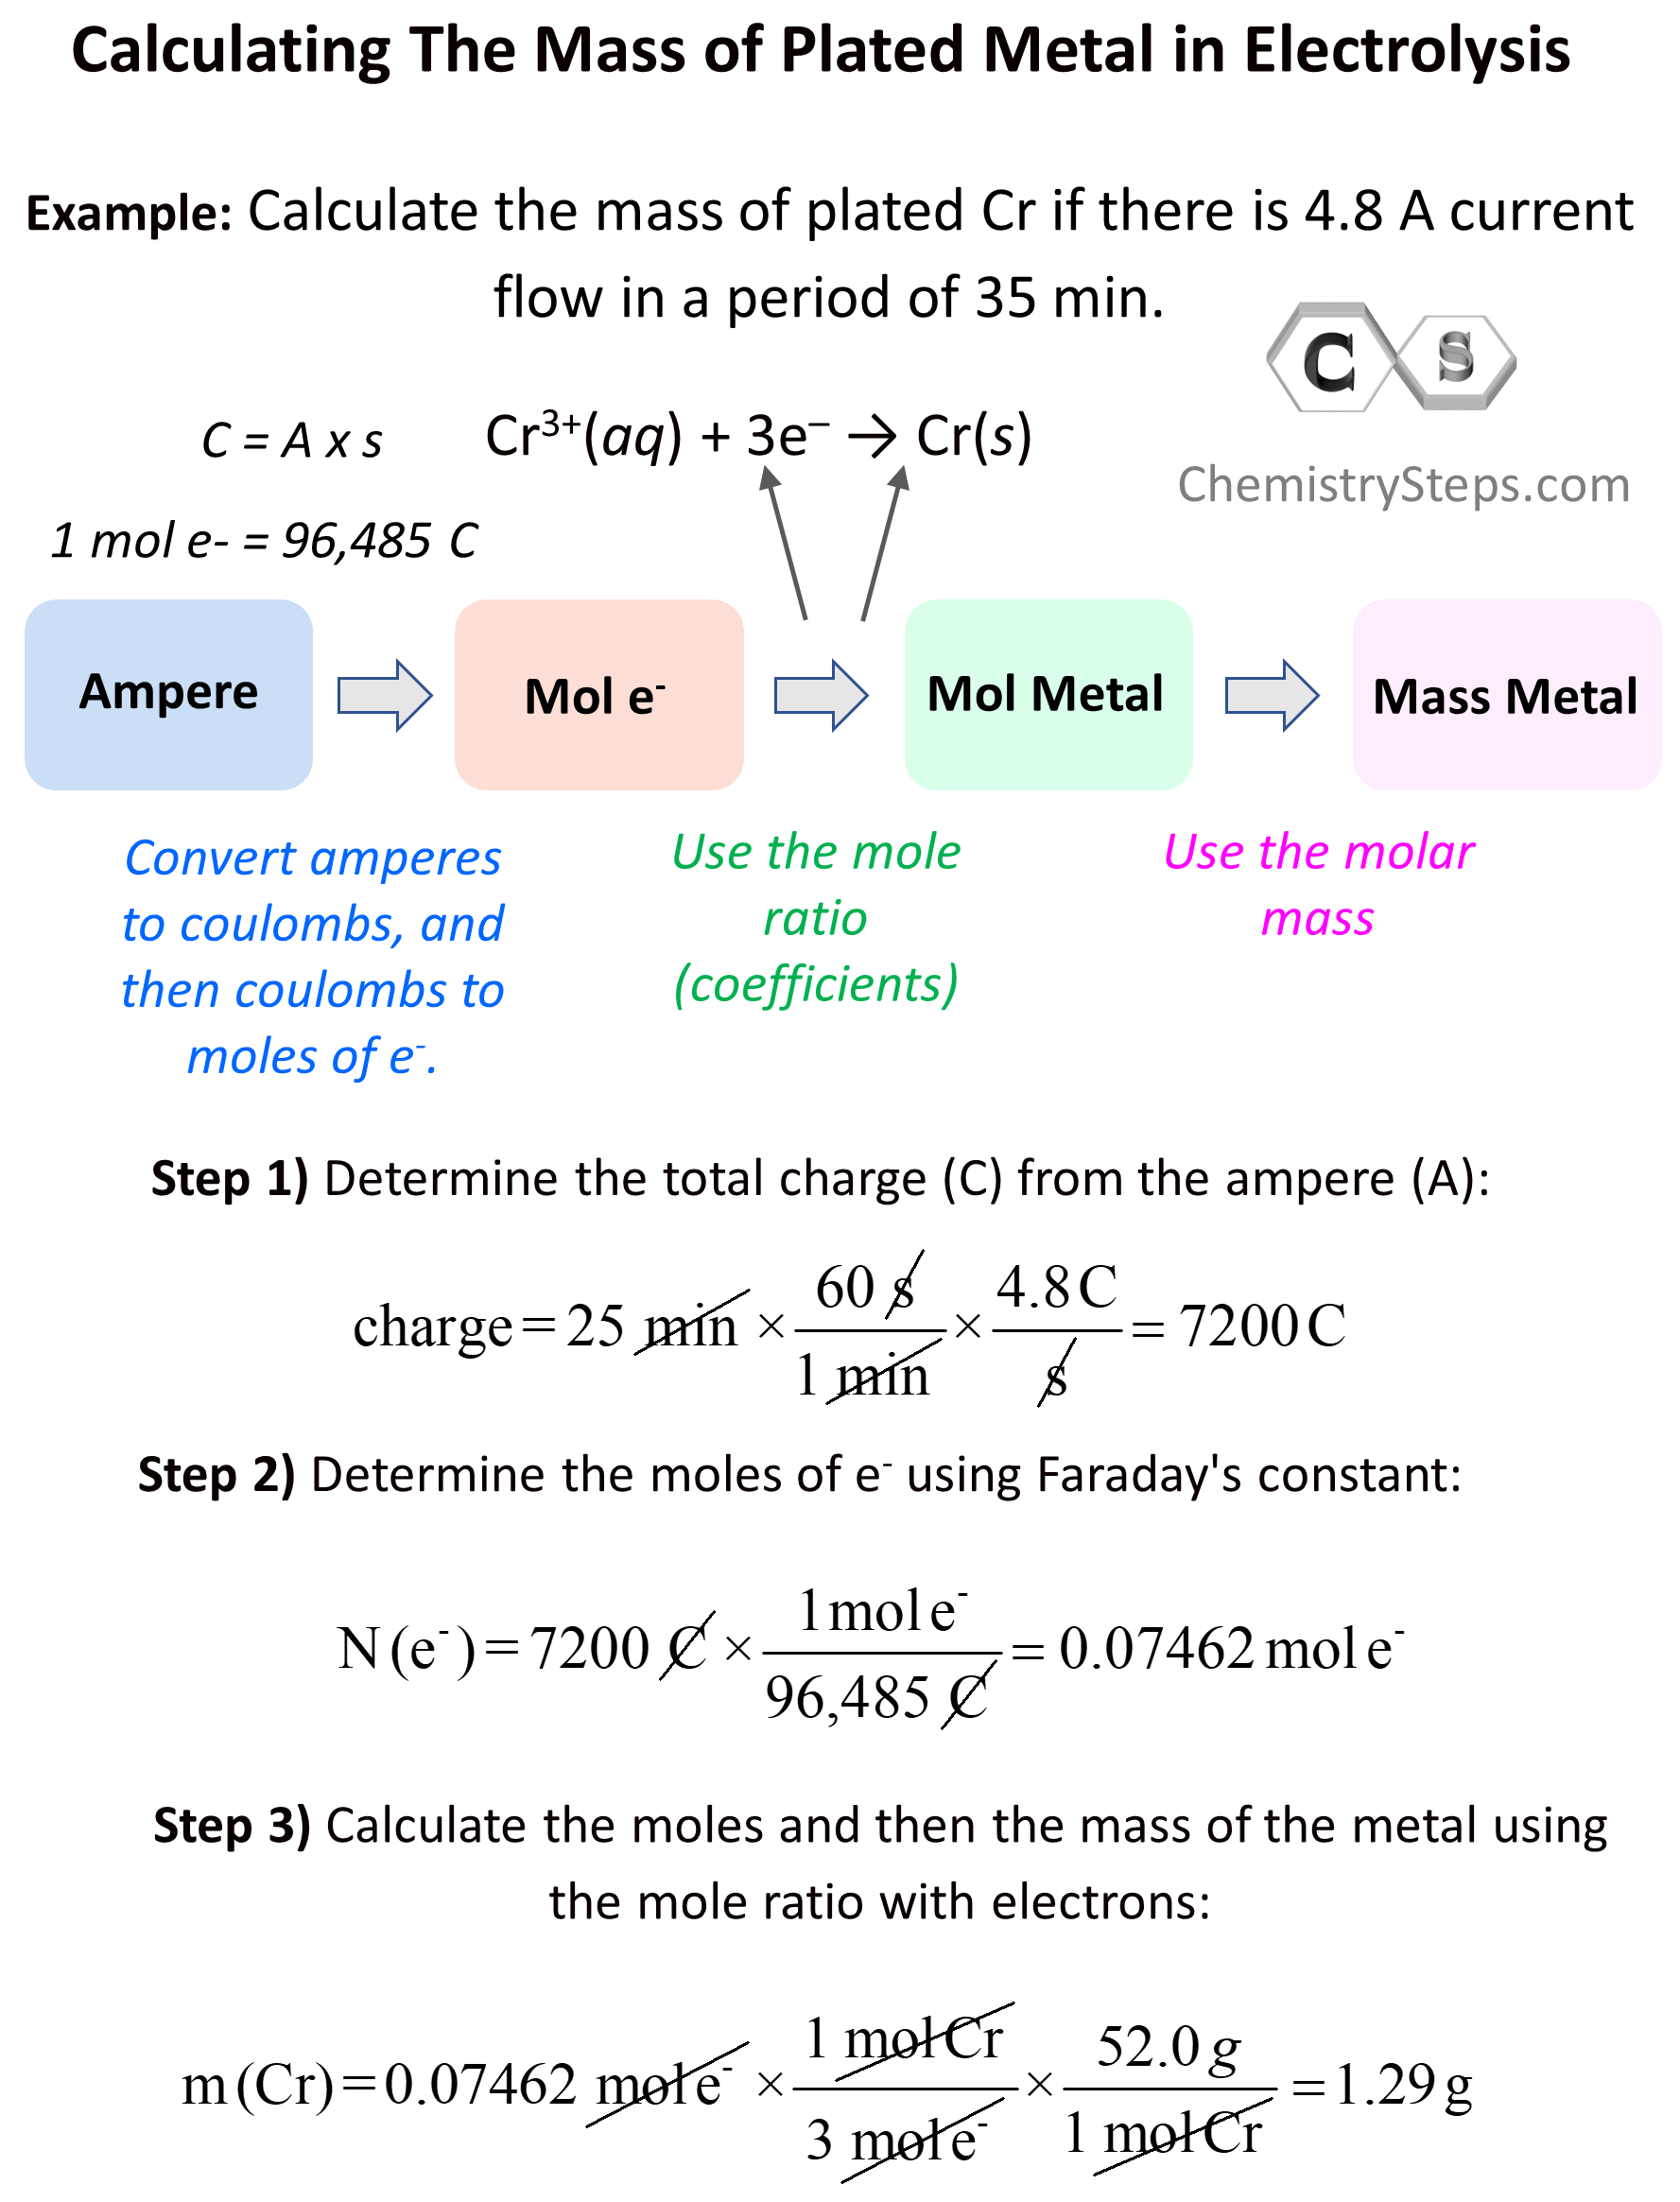 Calculating The Mass of Plated Metal in Electrolysis